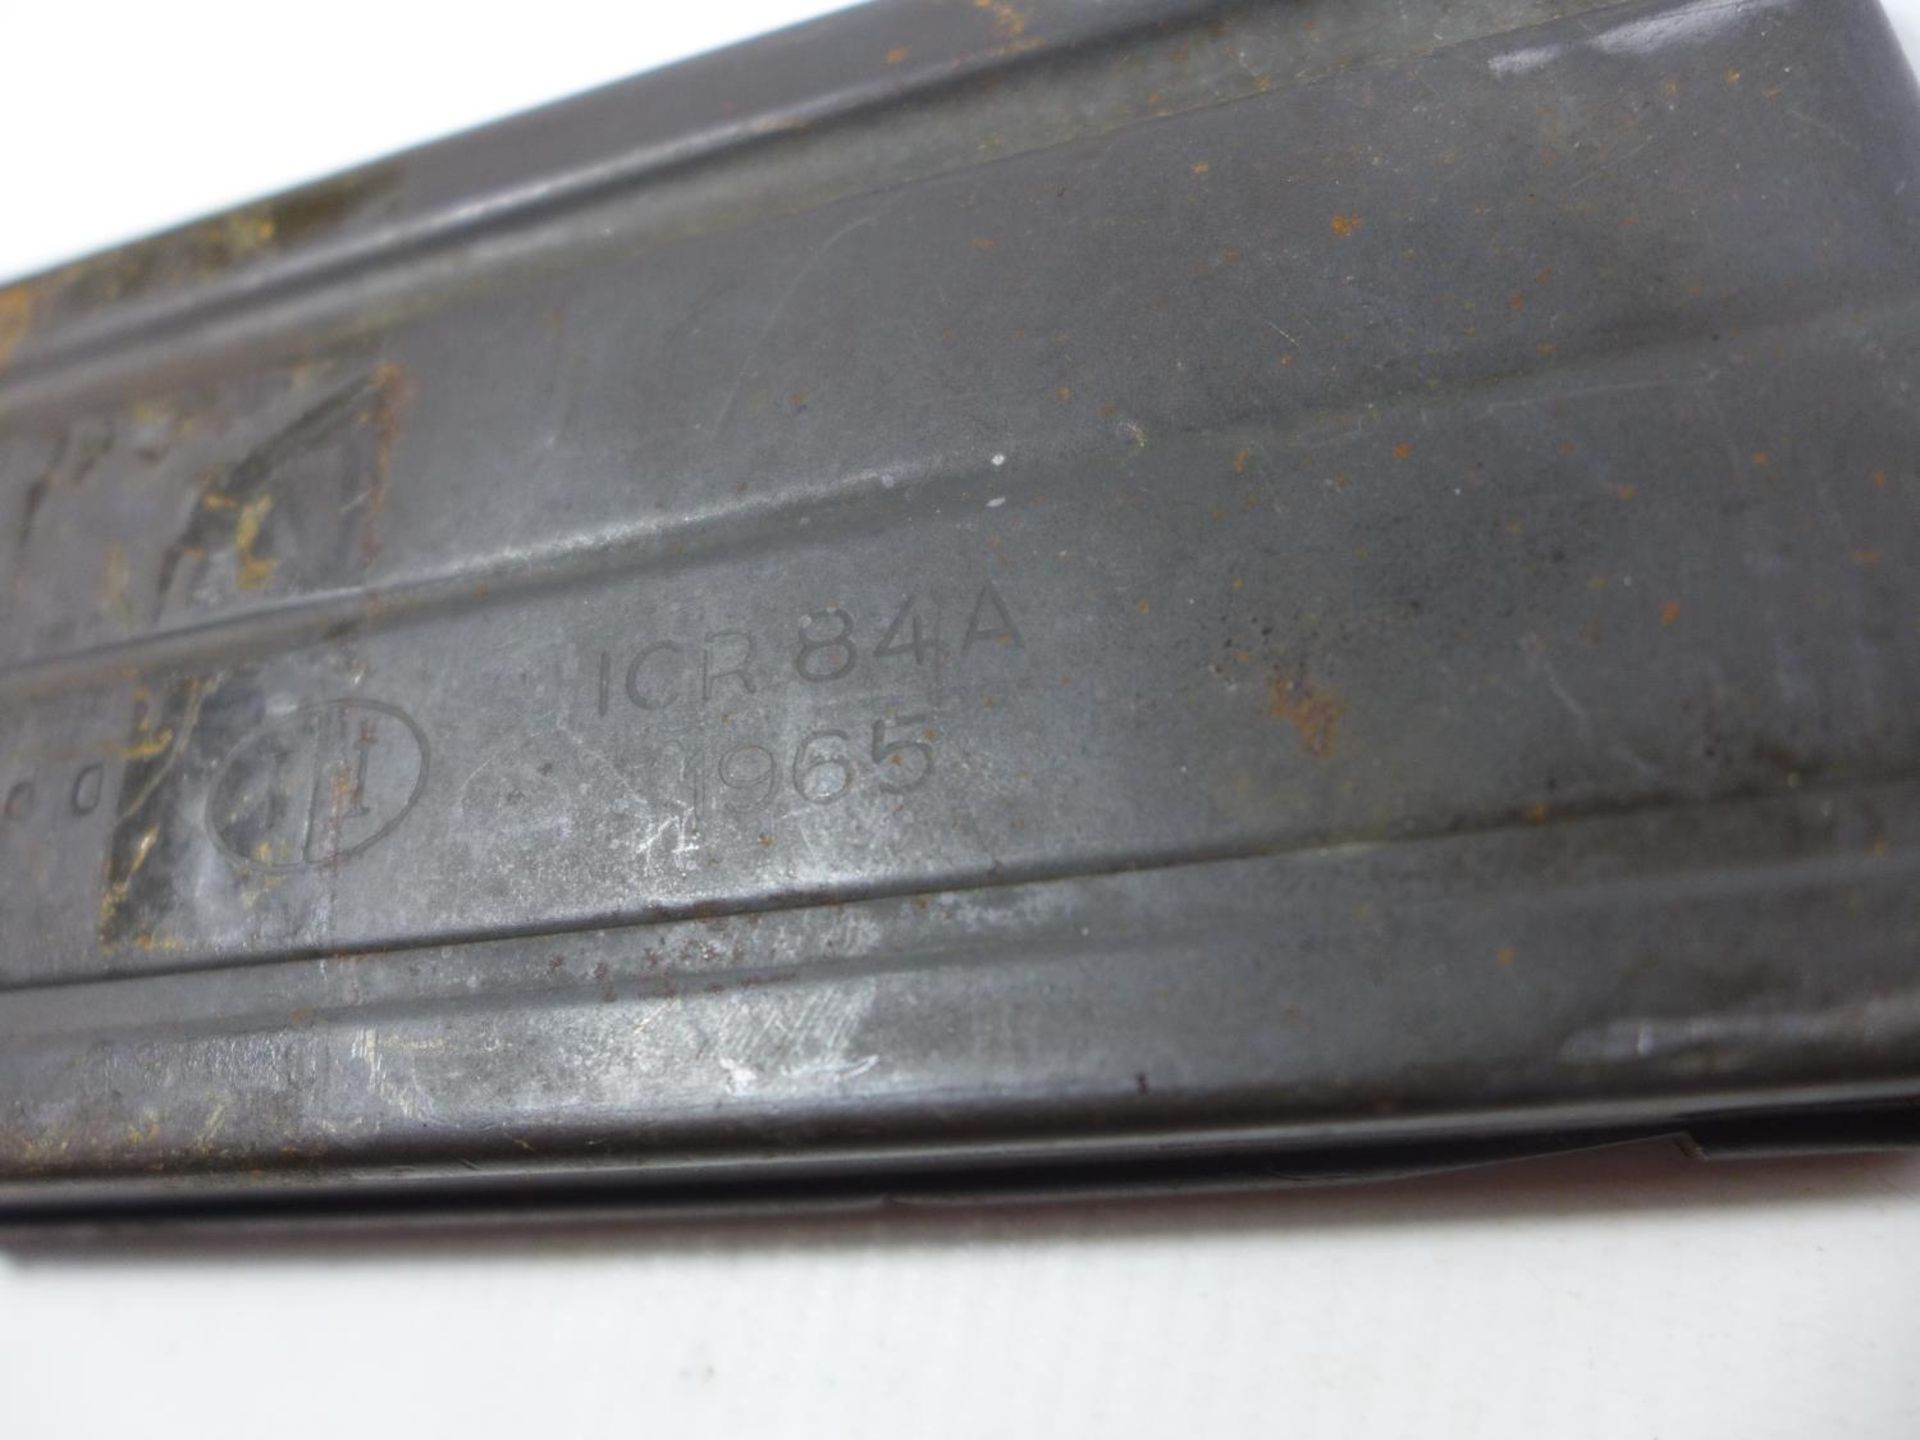 A SILVER TOP WALKING CANE, LENGTH 87CM, ICR84A GUN MAGAZINE DATED 1965, PART OF A REPLICA P38 (3) - Image 2 of 5